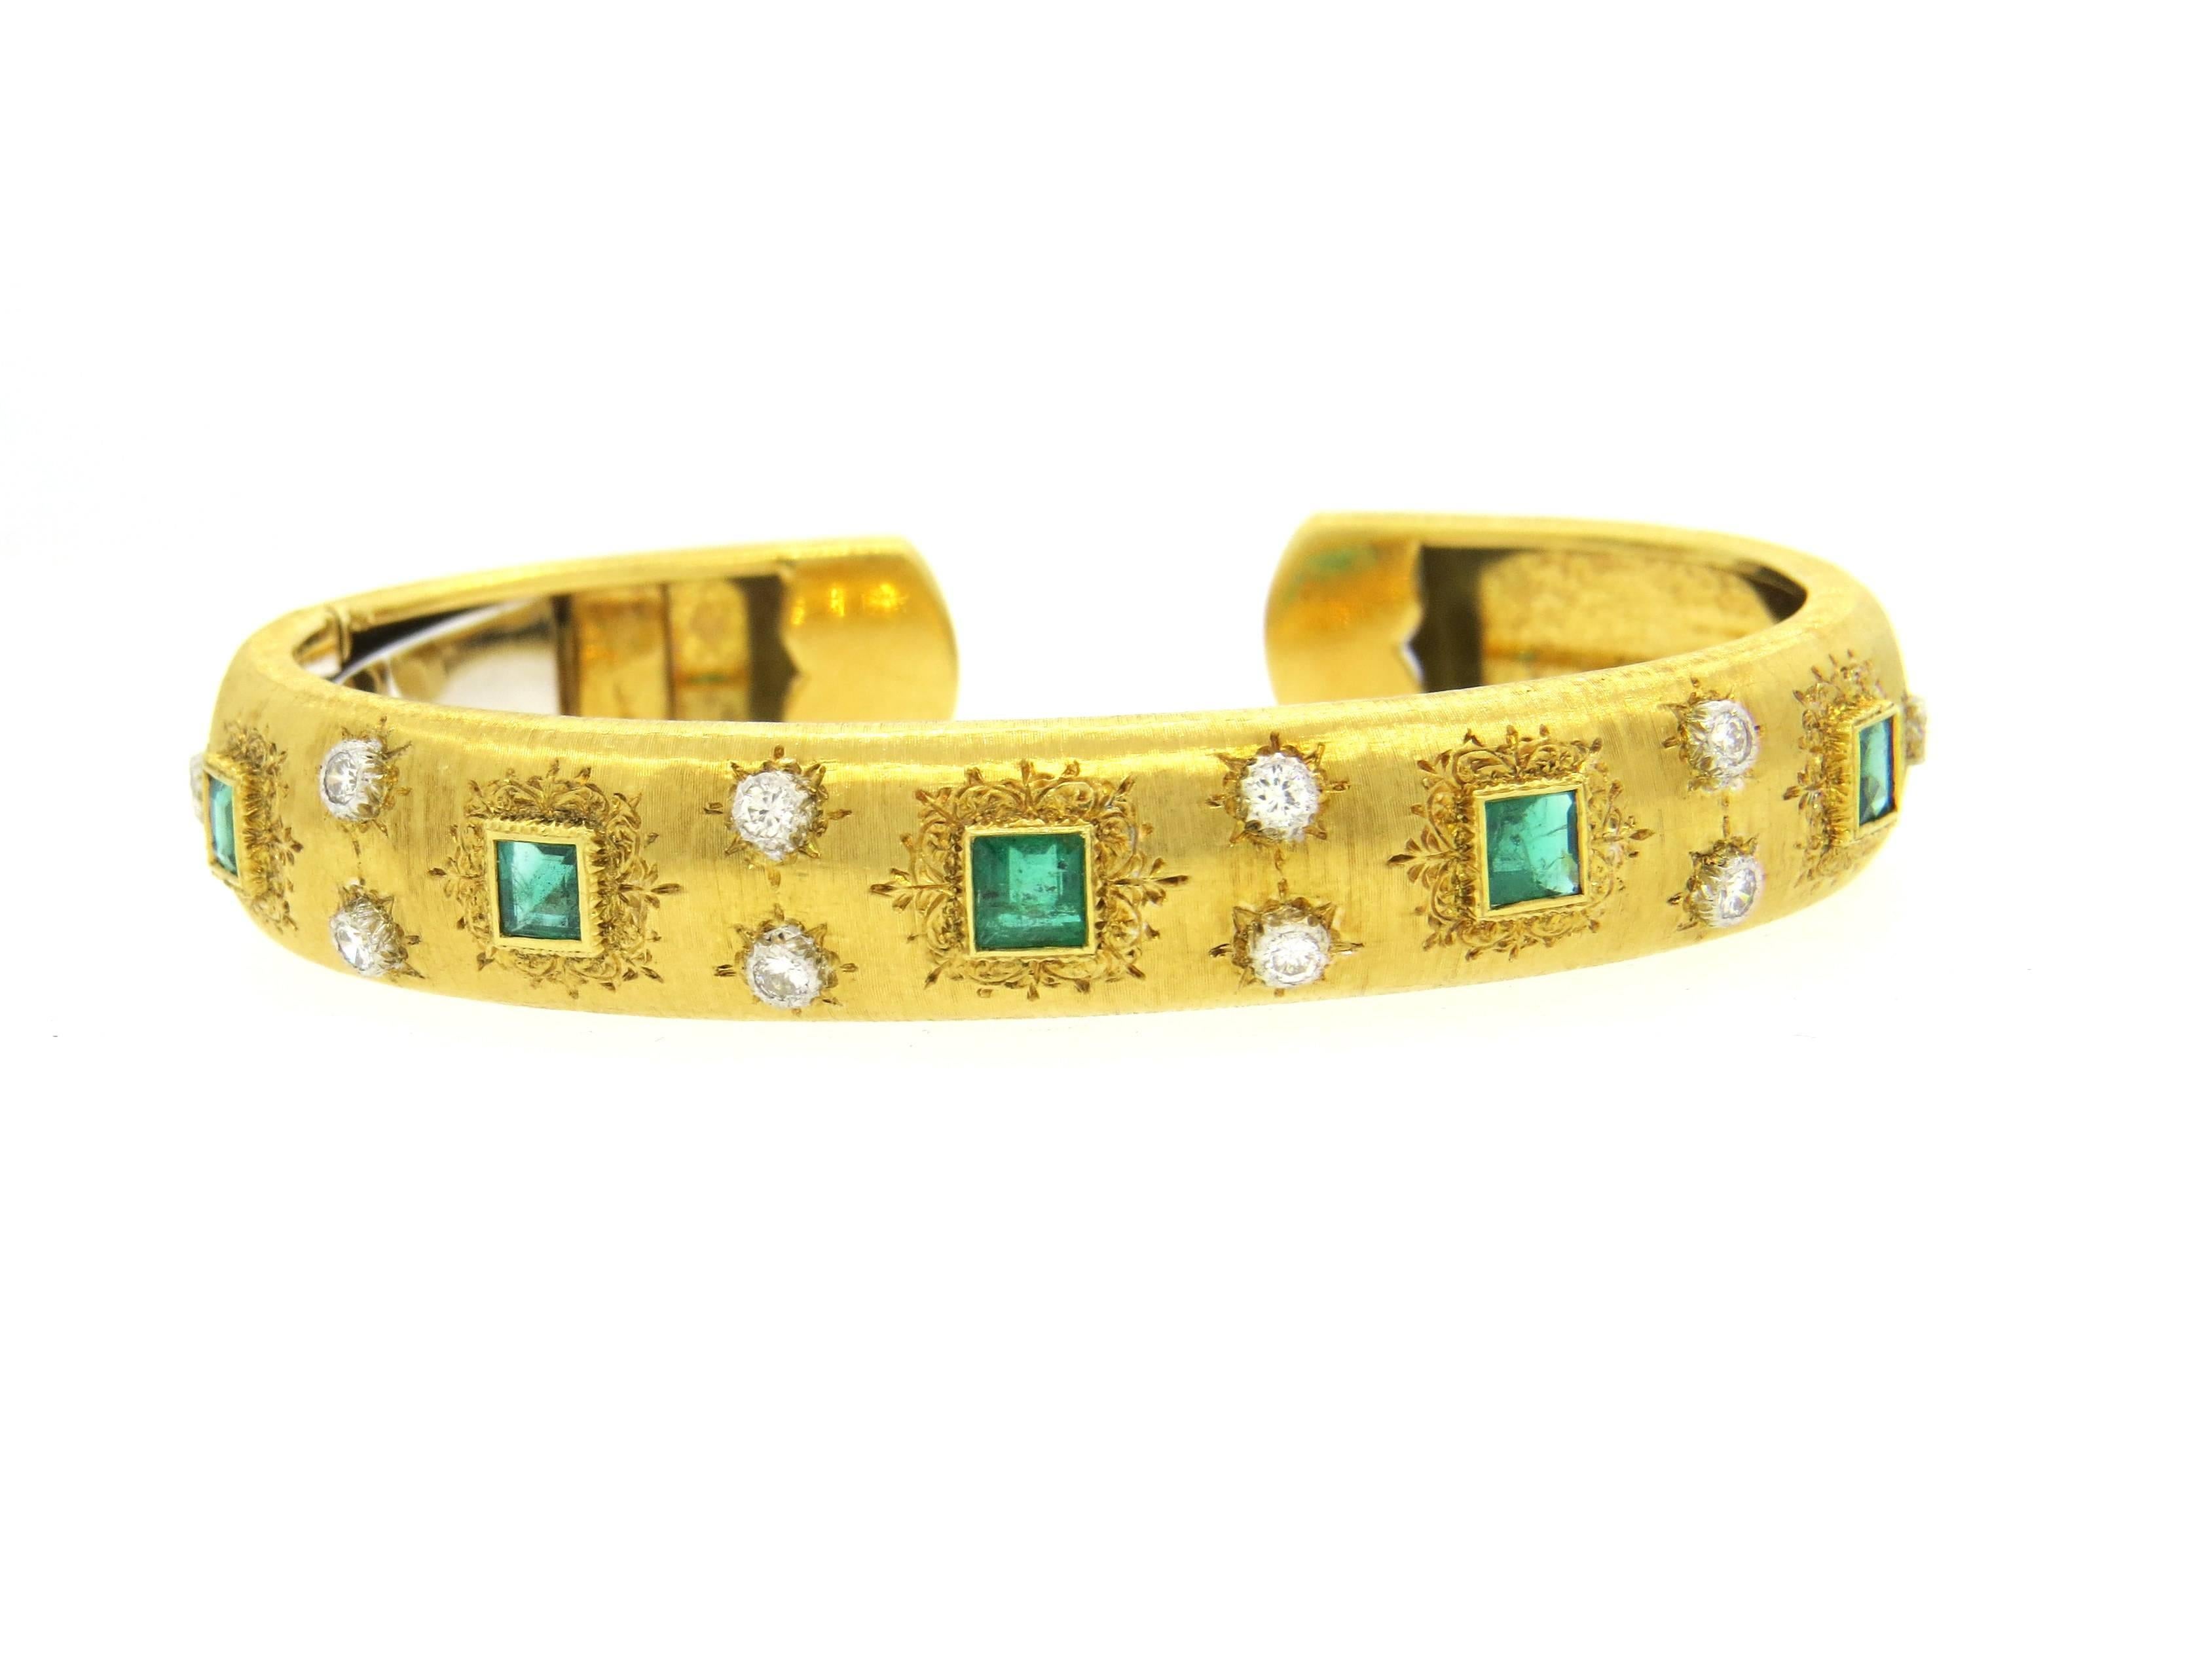 18k yellow gold cuff bracelet, crafted by Mario Buccellati, decorated with approx.  1.45ctw in emeralds and 0.40ctw in G/VS diamonds. Bracelet will comfortably fit up to 7